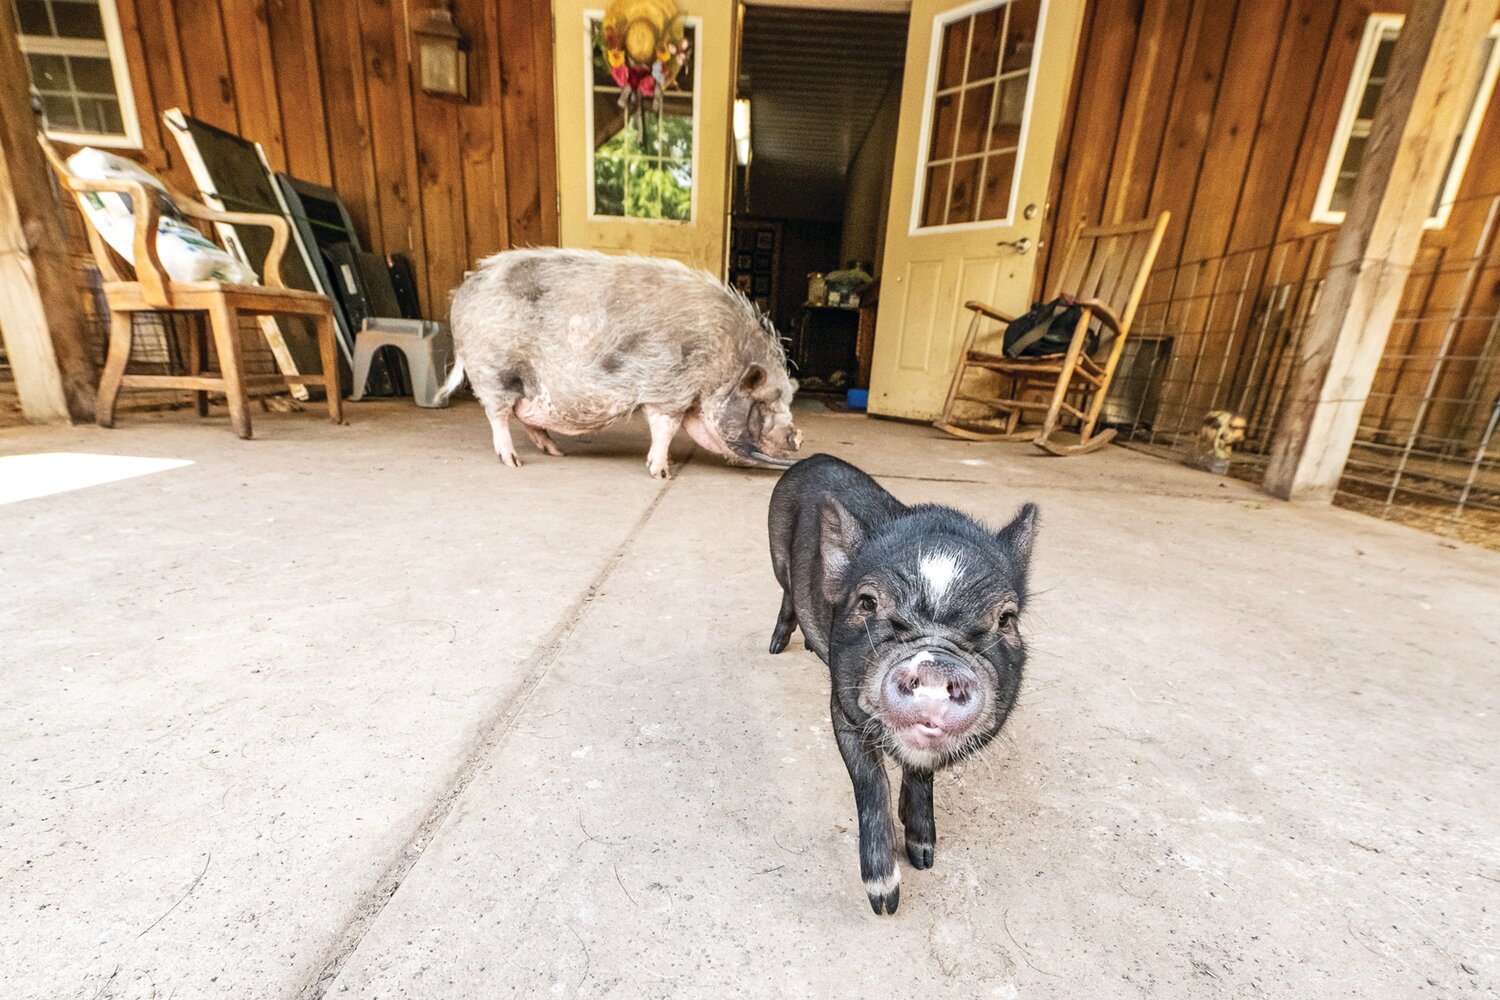 The money made from Ross Mill Farm’s products and services is used to finance rescue and care of pigs until they are adopted.